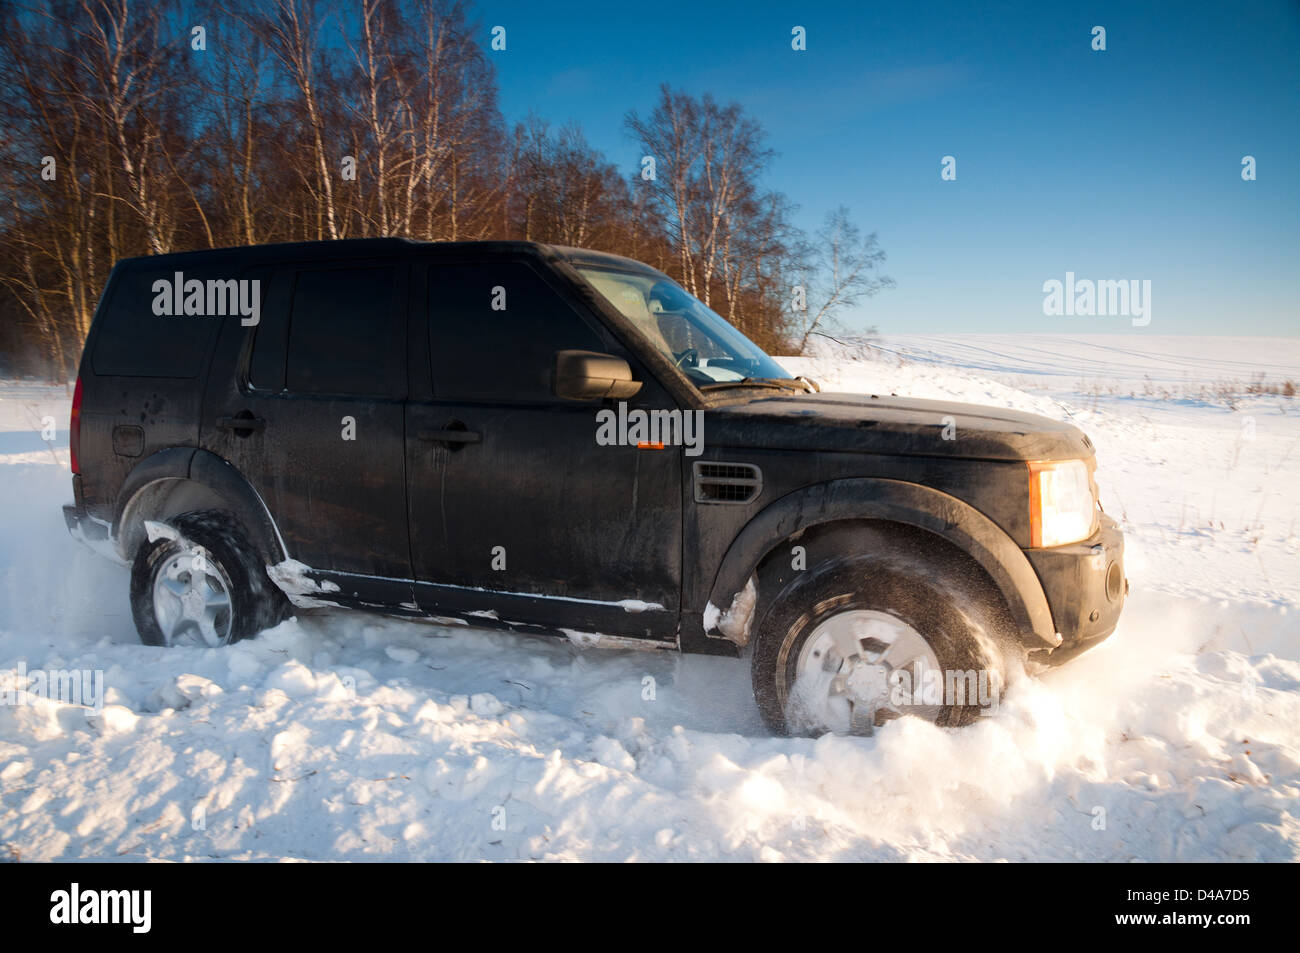 Land Rover Discovery Stockfoto